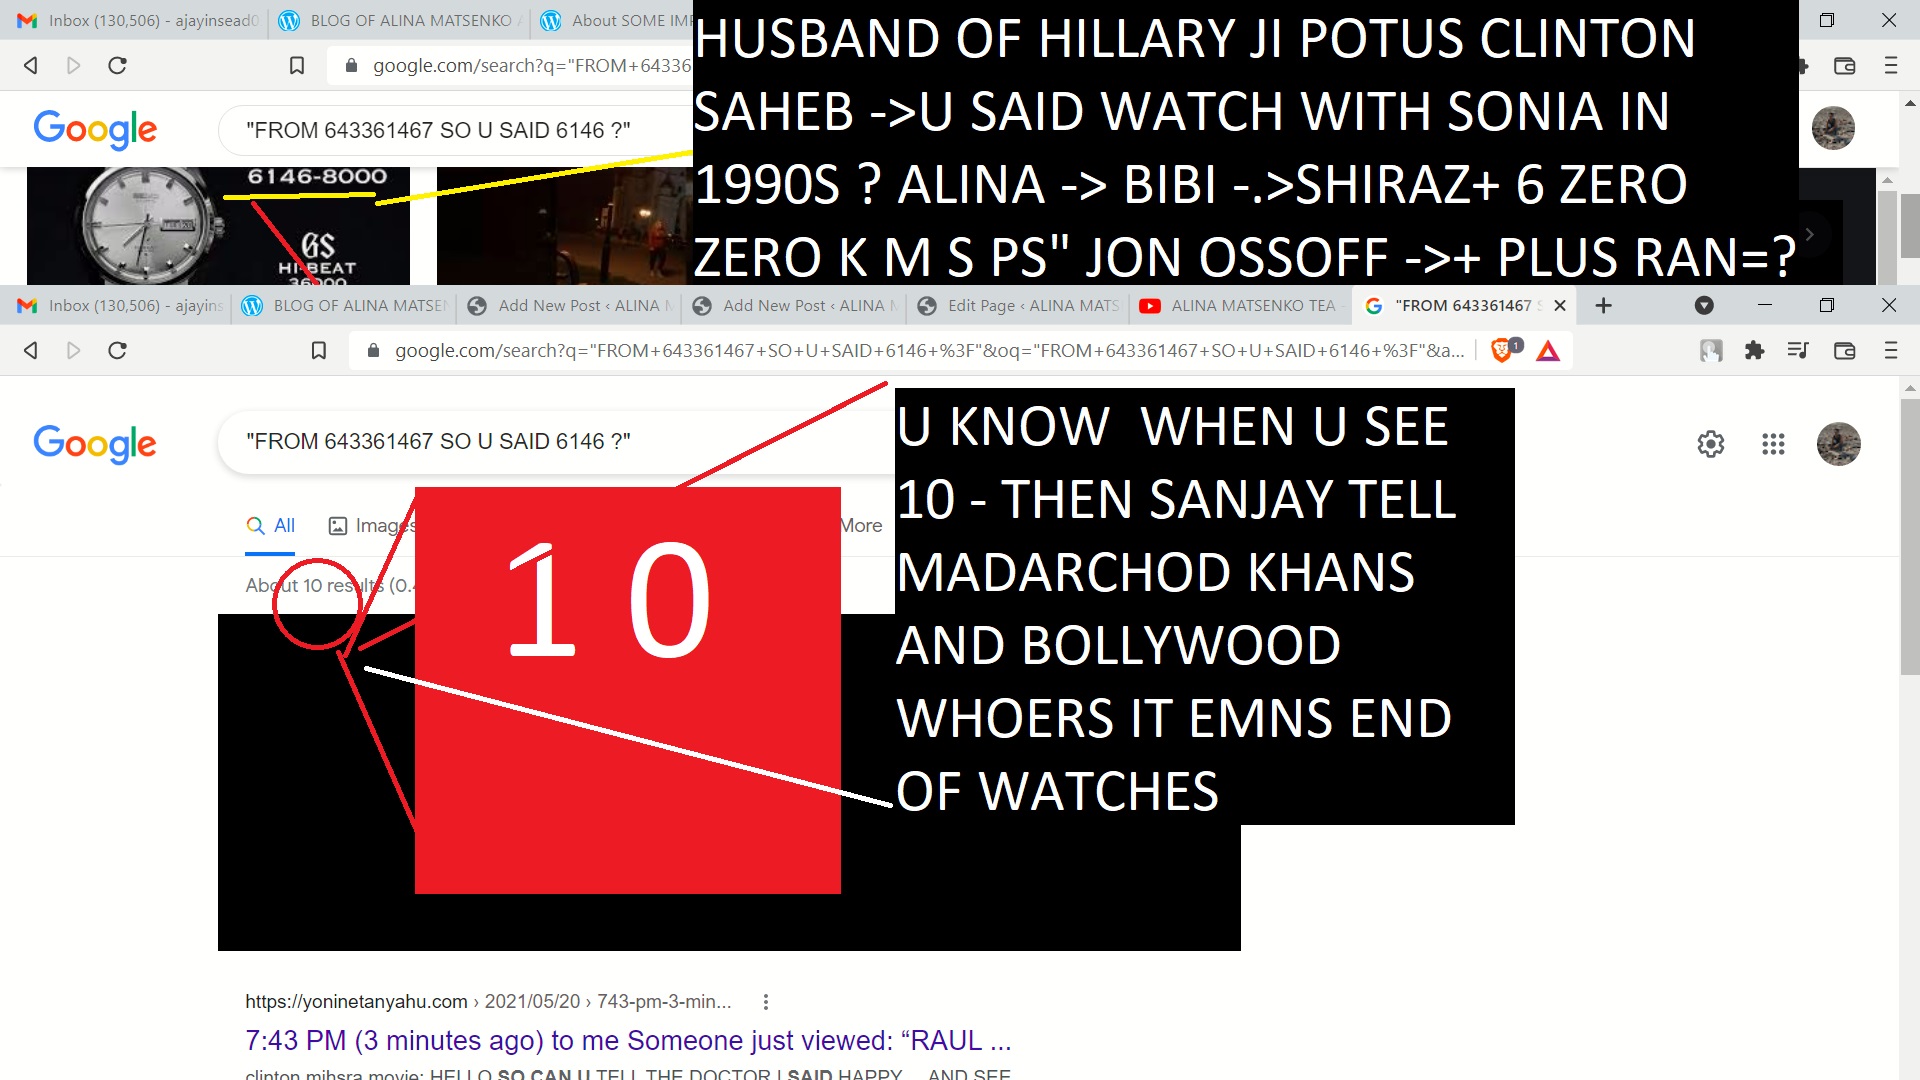 FROM 643361467 SO U SAID 6146 -- ALINA MATSENKO AJAY MISHRA 10 WATCH ENDS NOW ALL NUMEBRS FROM ZERO TO TEN ARE IN